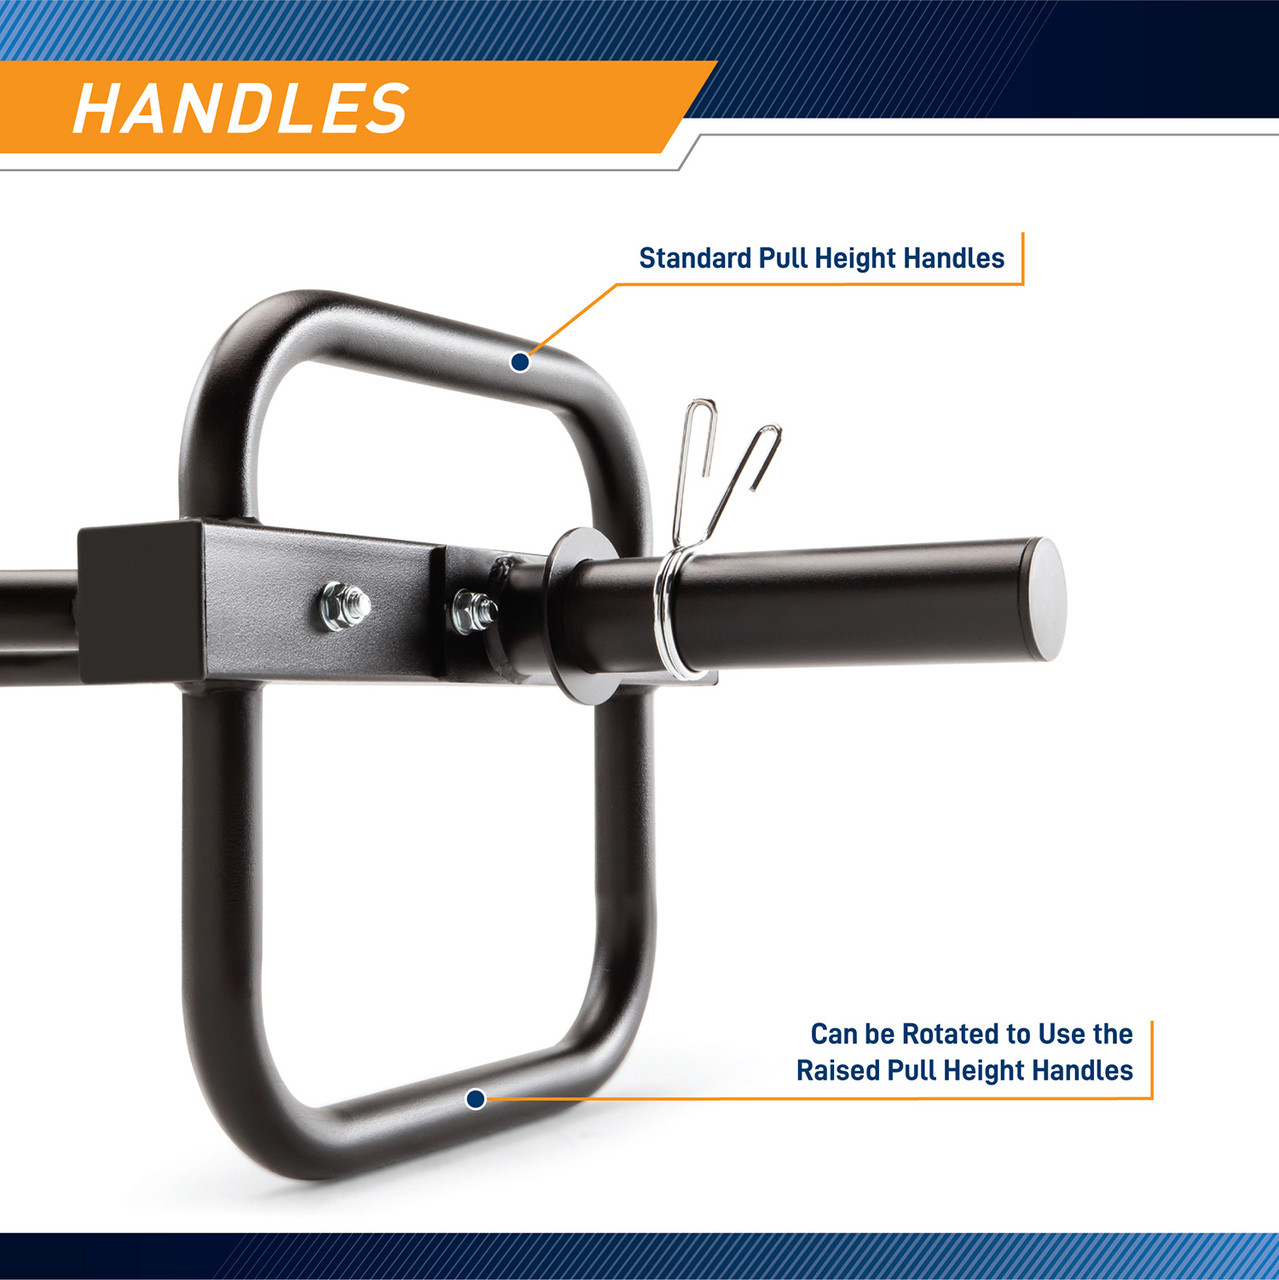 The Olympic Hex Trap Bar / Shrug Bar with Raised Handles – Marcy HTB-6976 has raised and standard height handles.